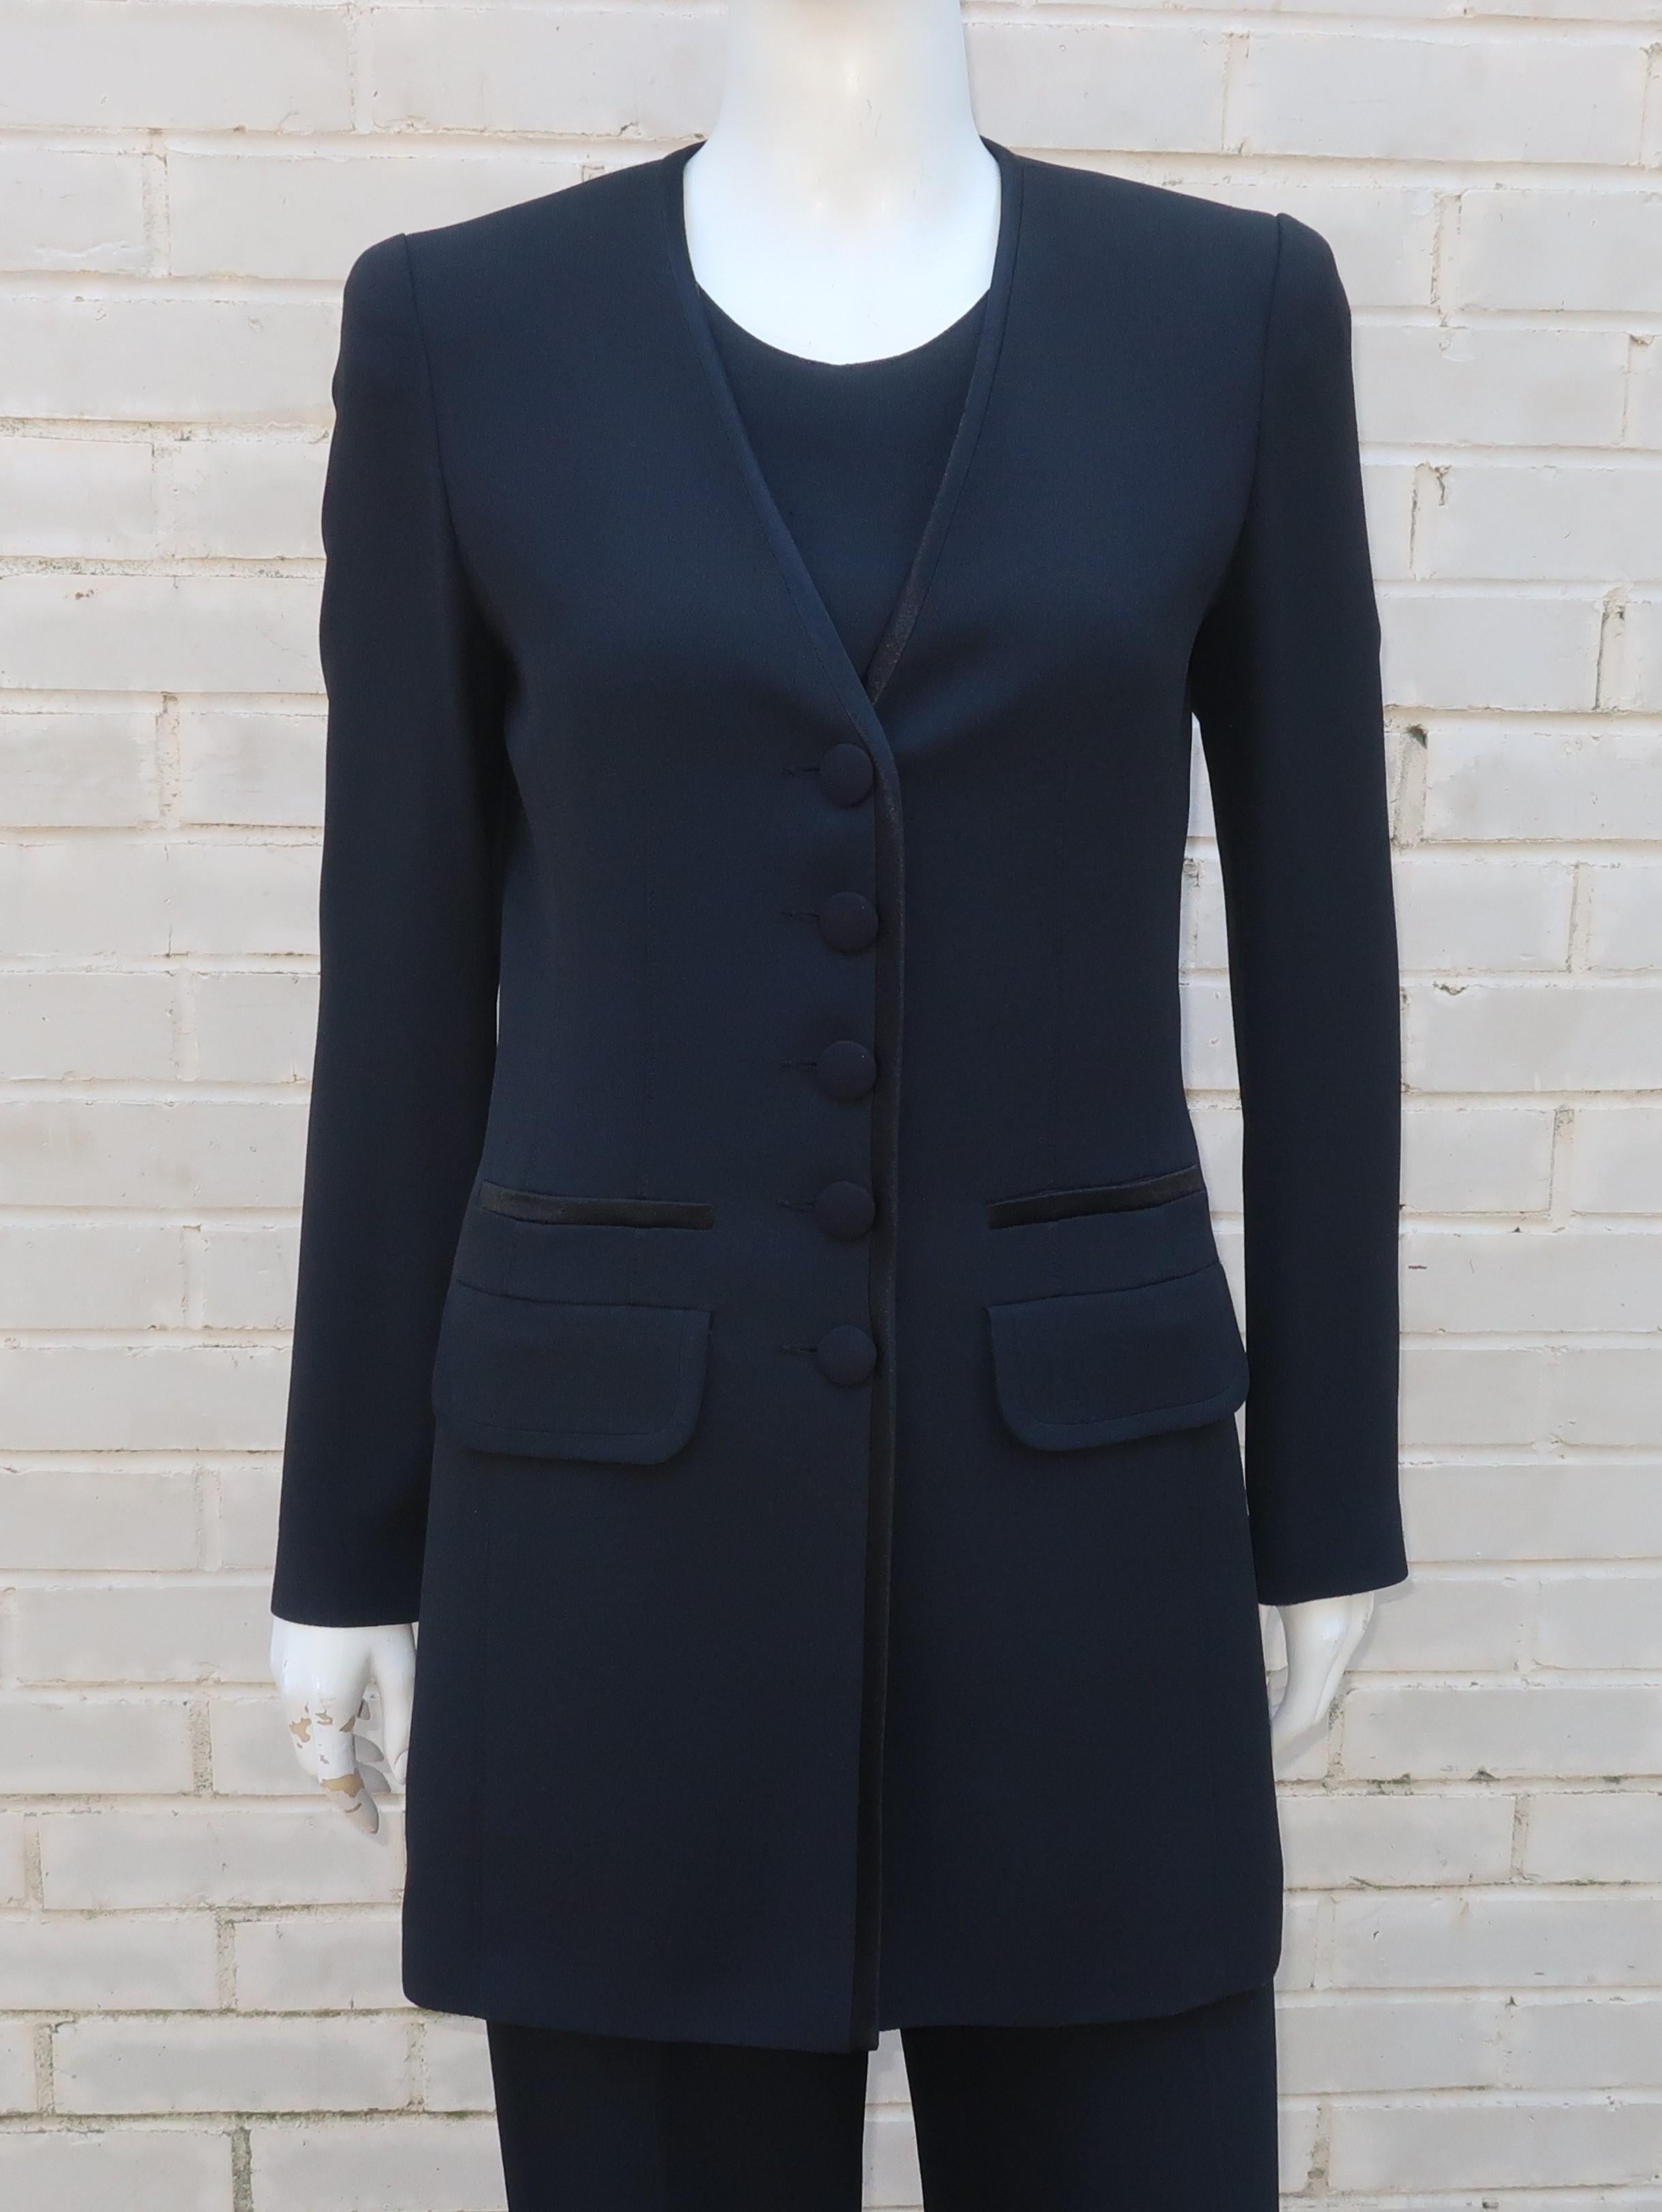 A versatile 1980's Sonia Rykiel three piece suit in a black rayon/acetate blend crepe fabric, including jacket, top and pants.  The chic details, including a satin finish to the collarless jacket, gives the ensemble a tuxedo styling which can take